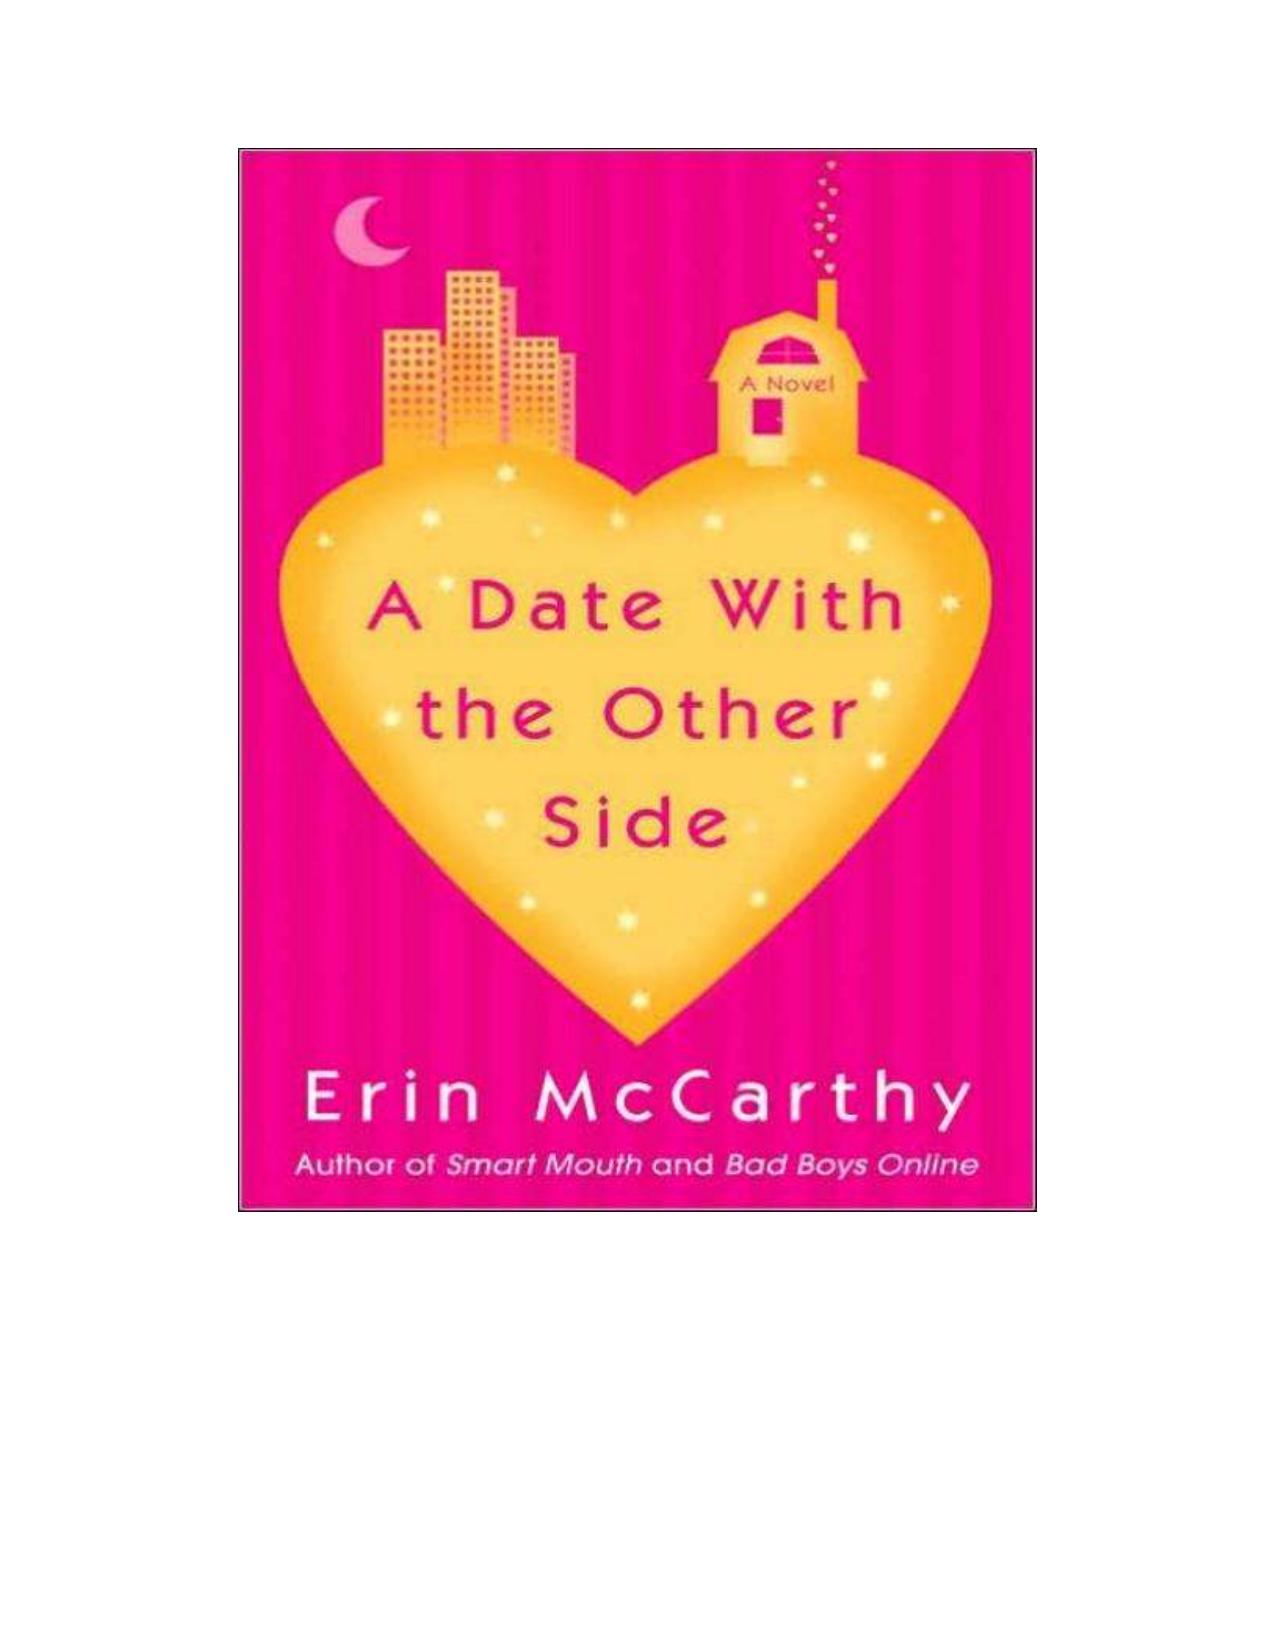 A Date With the Other Side by Erin McCarthy